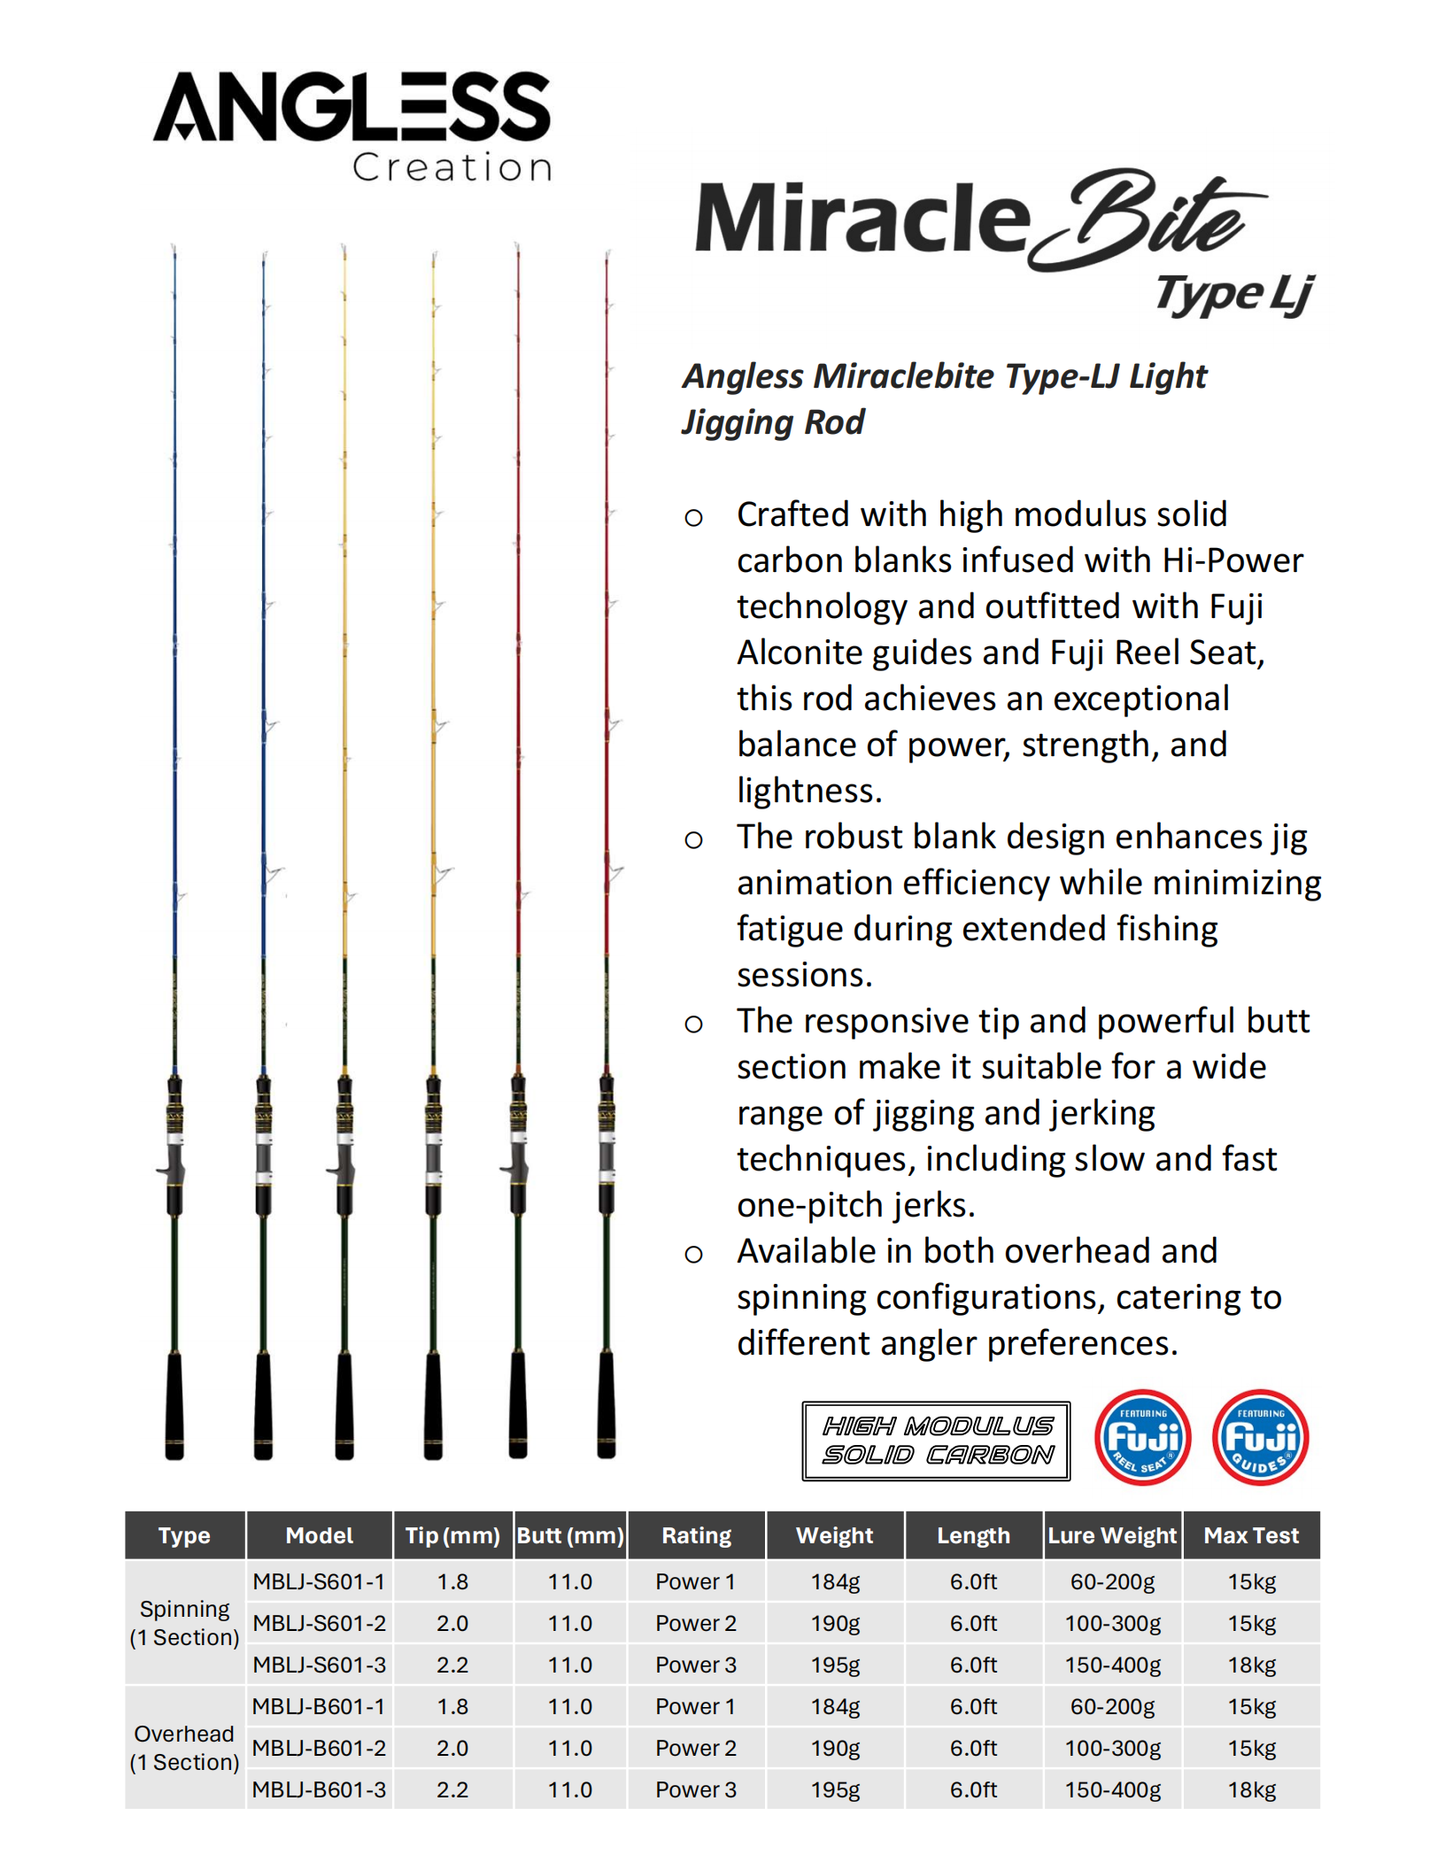 Angless MiracleBite Type-Lj jigging rod (1section)